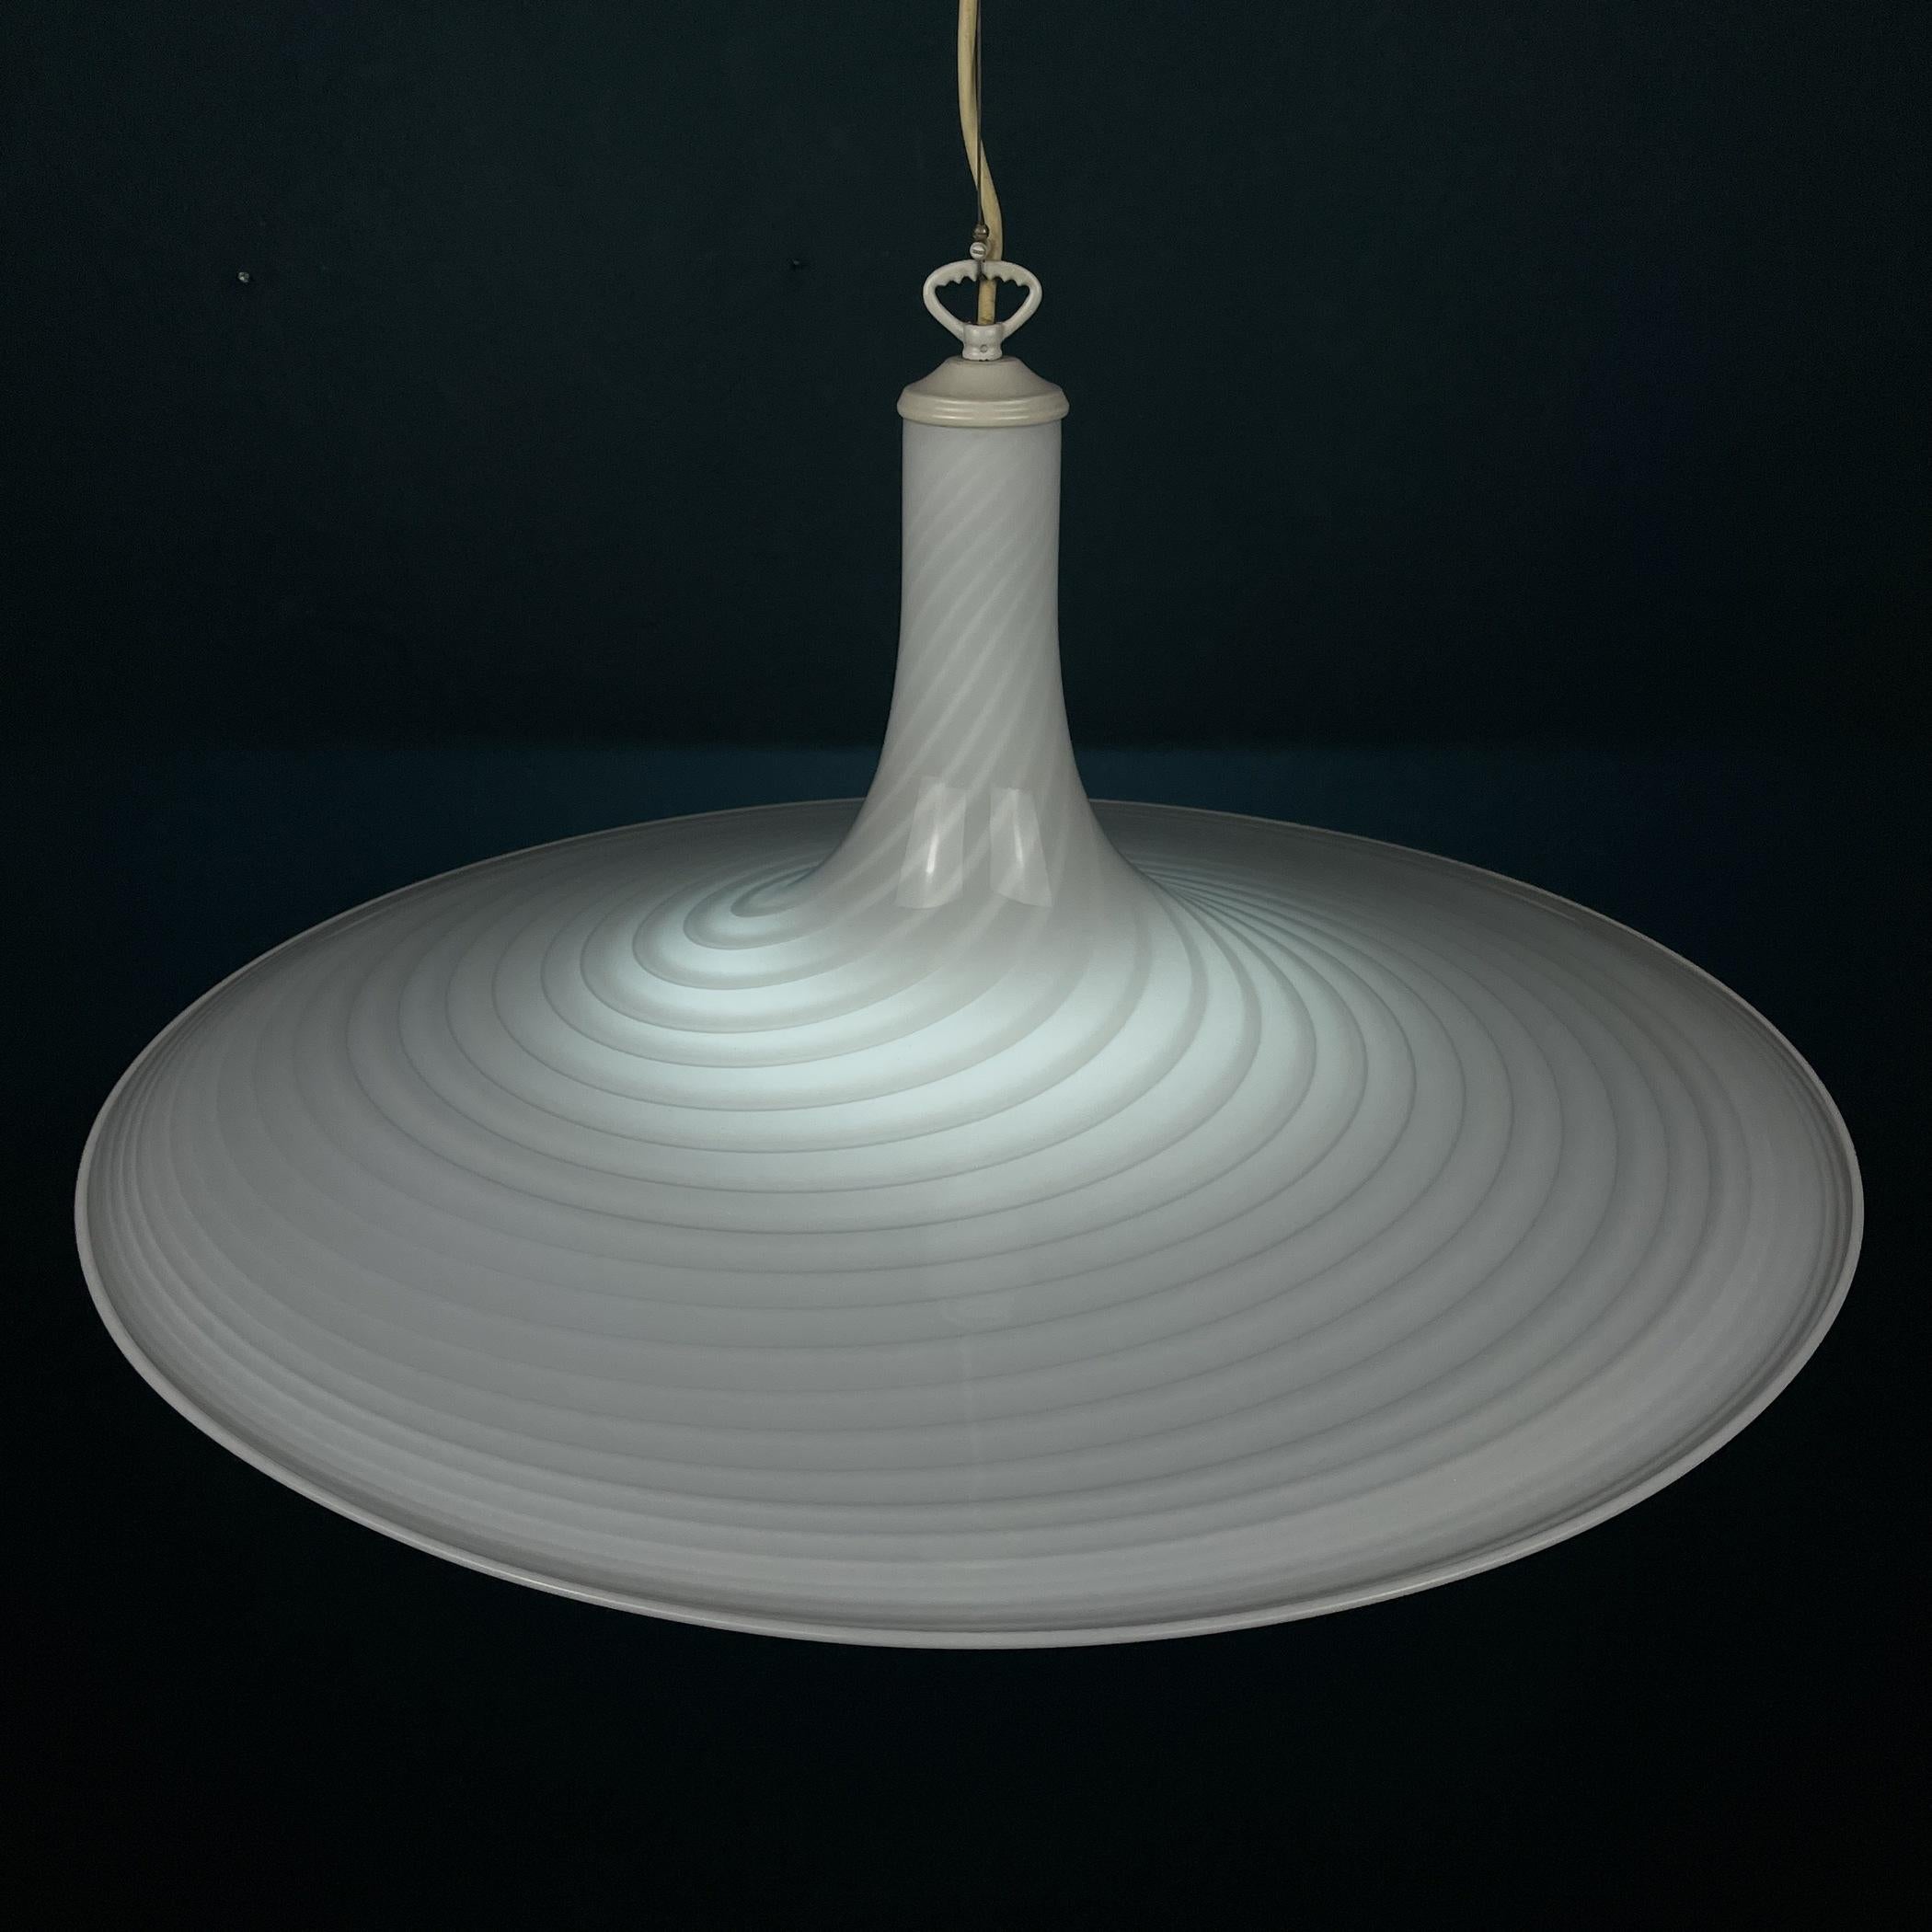 This swirl large Murano pendant lamp by Vetri Murano was made in Italy in the 70s. Very beautiful white Murano glass with bends in the form of a tulip. Perfect vintage condition. No chips or cracks. Requires a standard Edison E27 with a screw lamp.